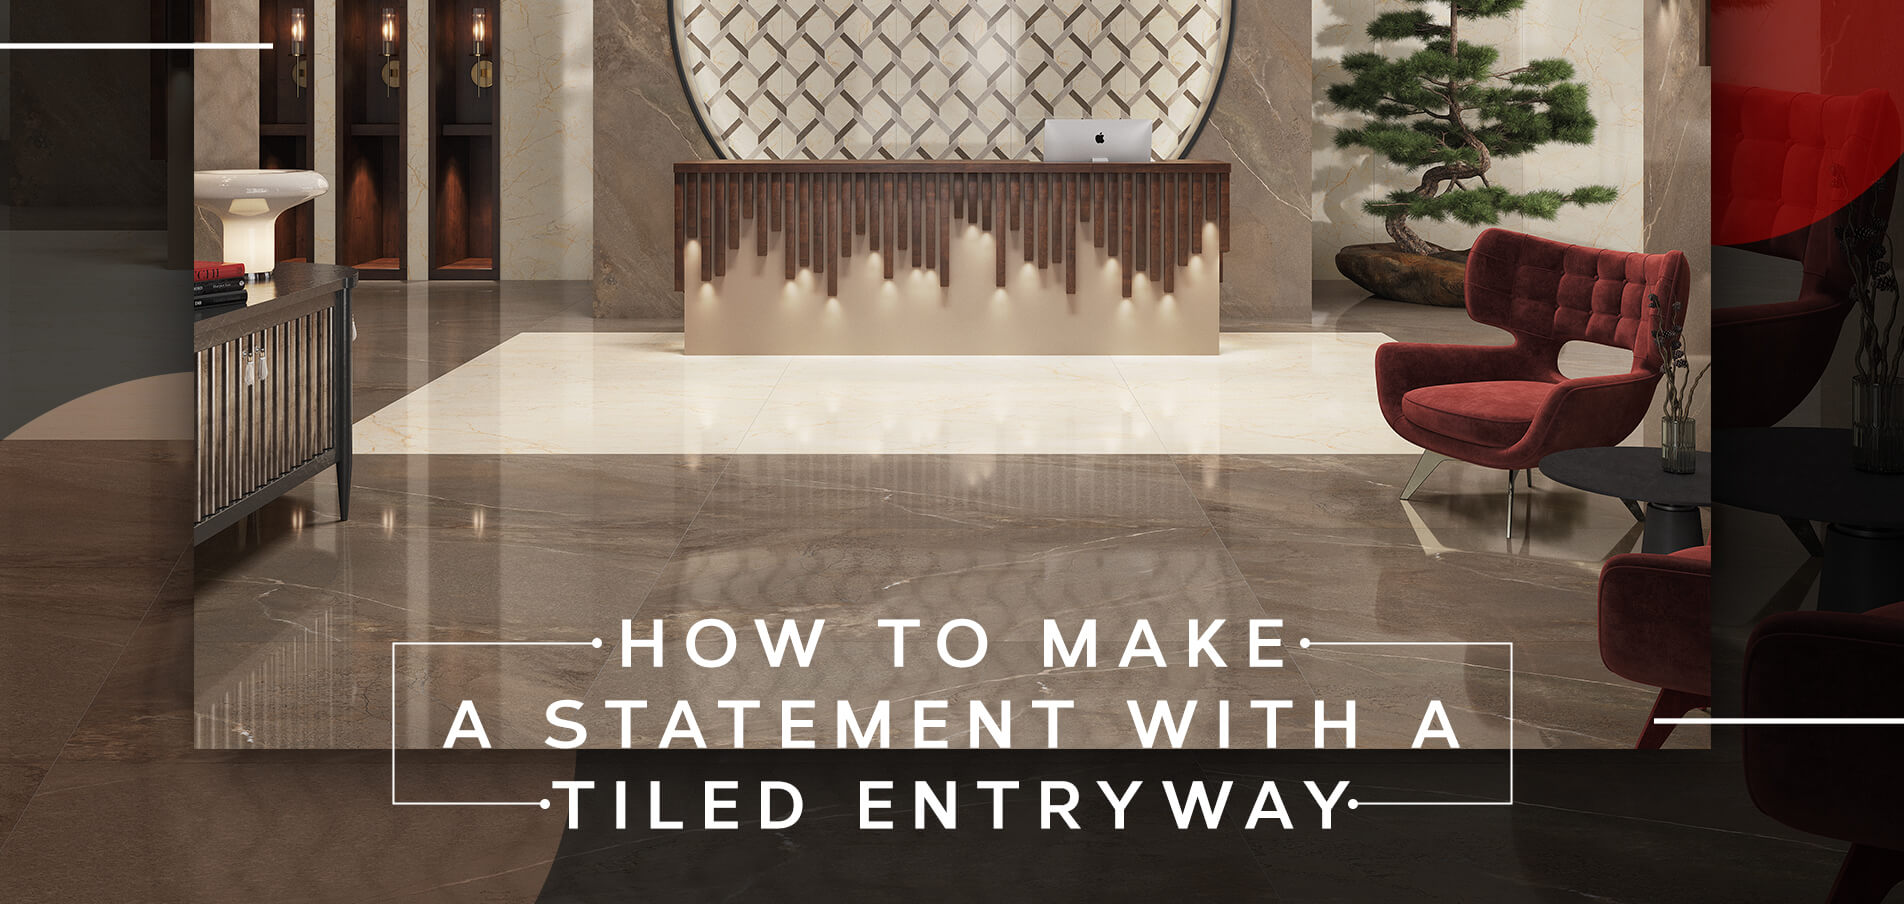 Make a Statement with a Tiled Entryway: Simpolos Tips